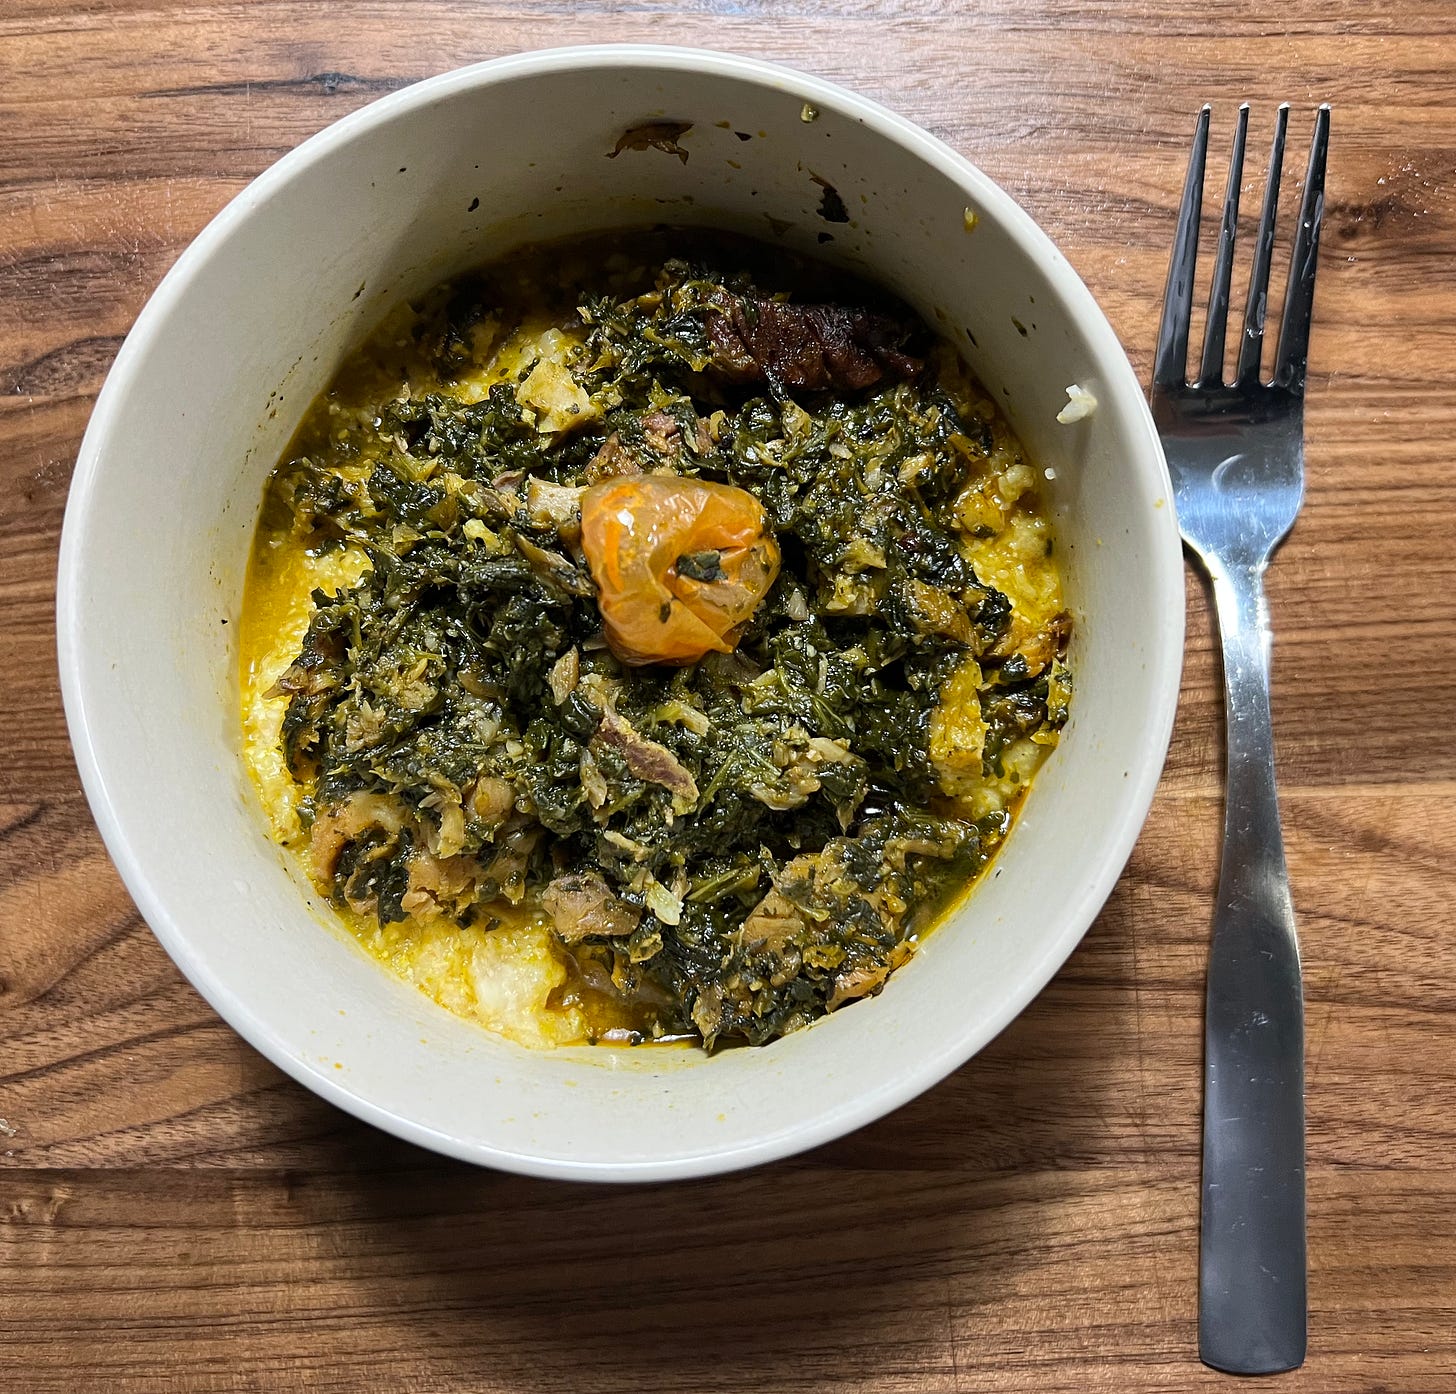 White bowl filled with wilted spinach, fish, and palm oil on a bed of grits topped with a habanero pepper. A mental fork and wooden cutting board surround the plating.